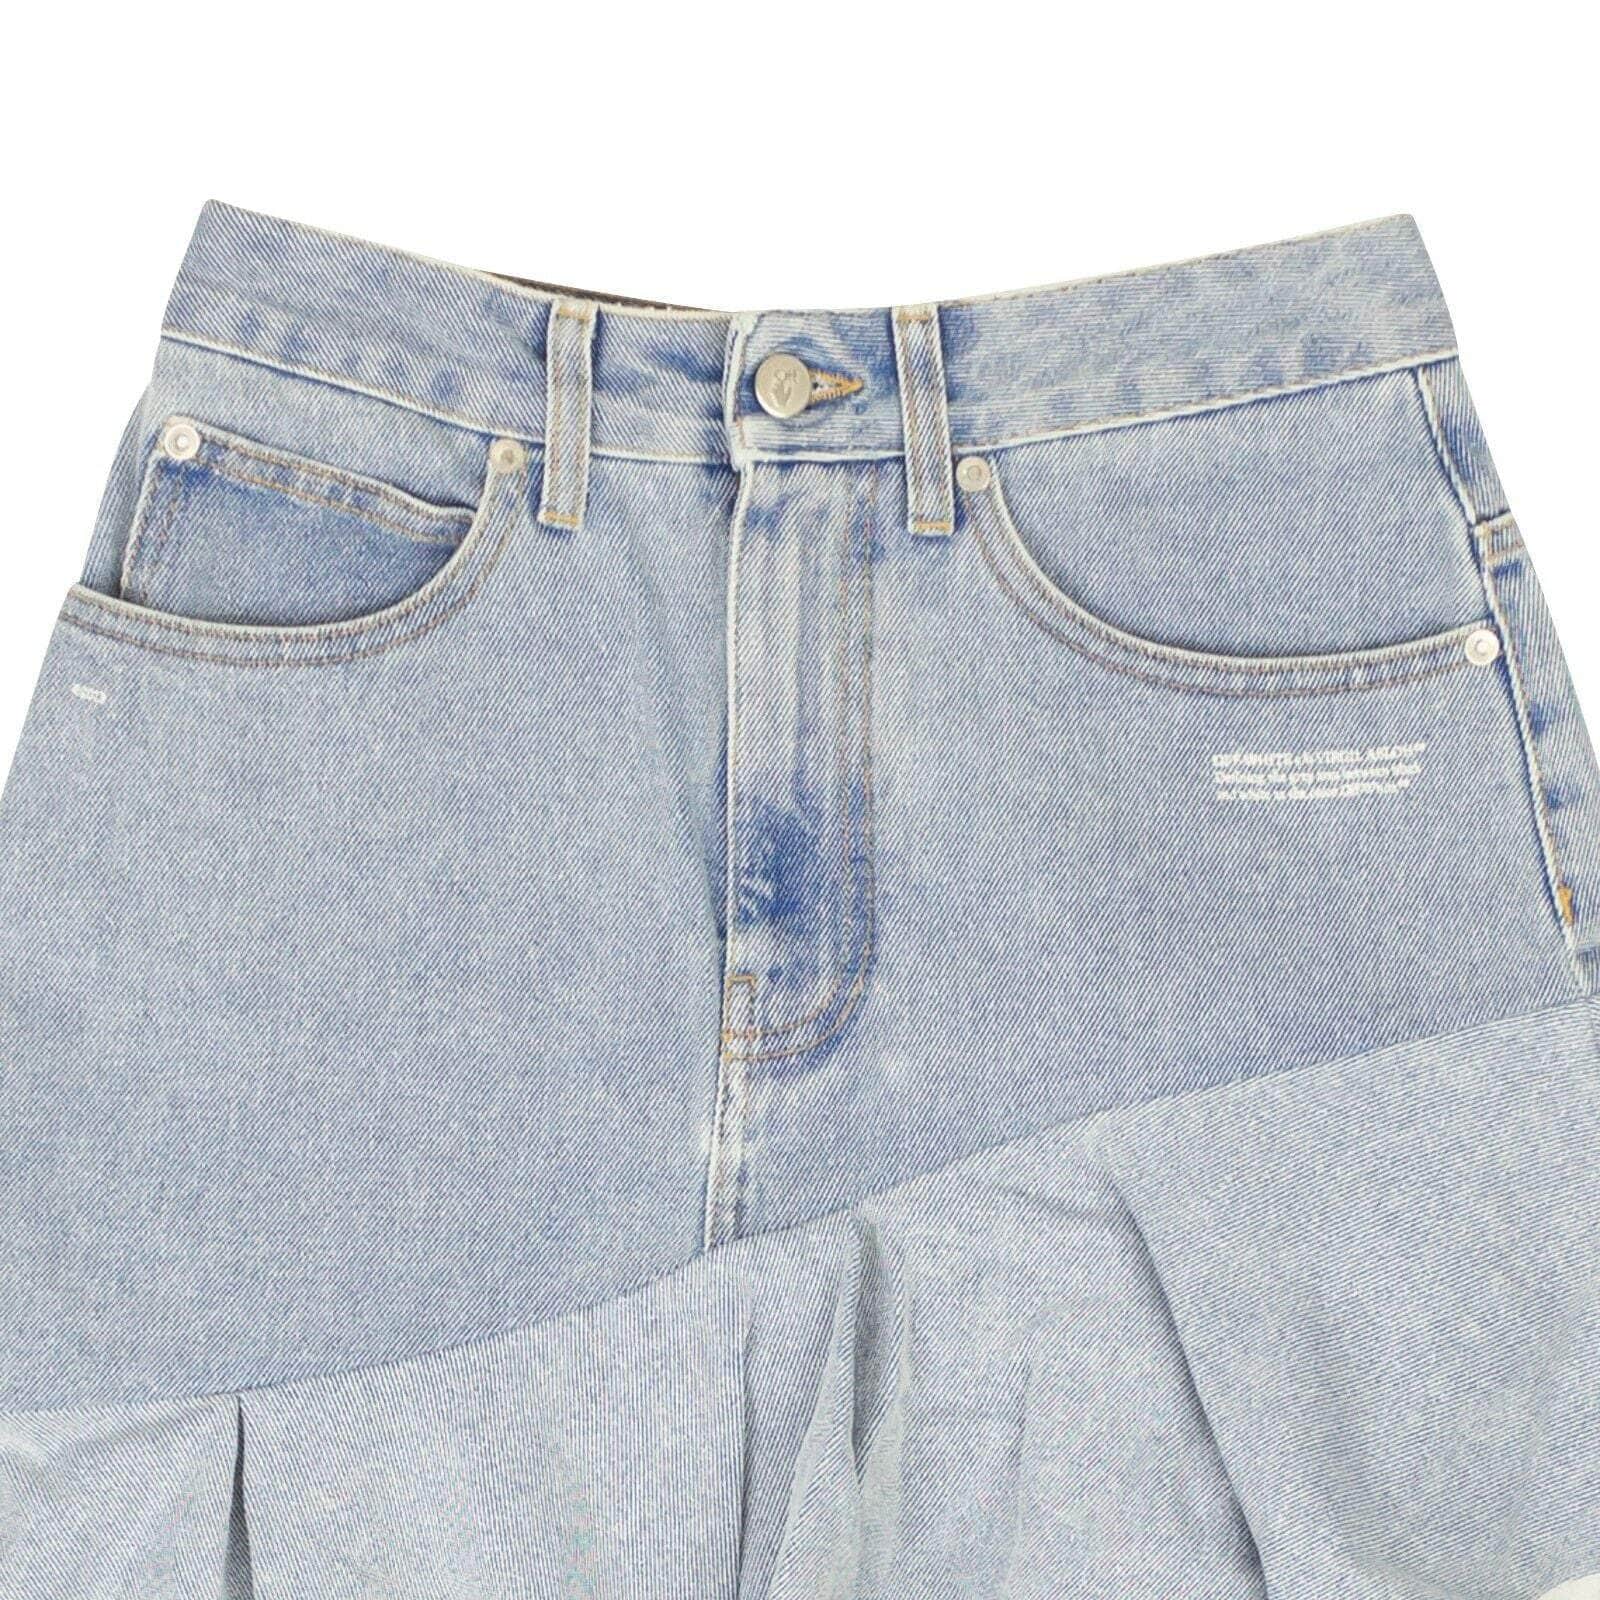 Off-White c/o Virgil Abloh 500-750, channelenable-all, chicmi, couponcollection, gender-womens, main-clothing, off-white-c-o-virgil-abloh, size-40, womens-flared-skirts 40 Blue Two Tone Ruffle Denim Skirt OFW-XBTM-0043/40 OFW-XBTM-0043/40